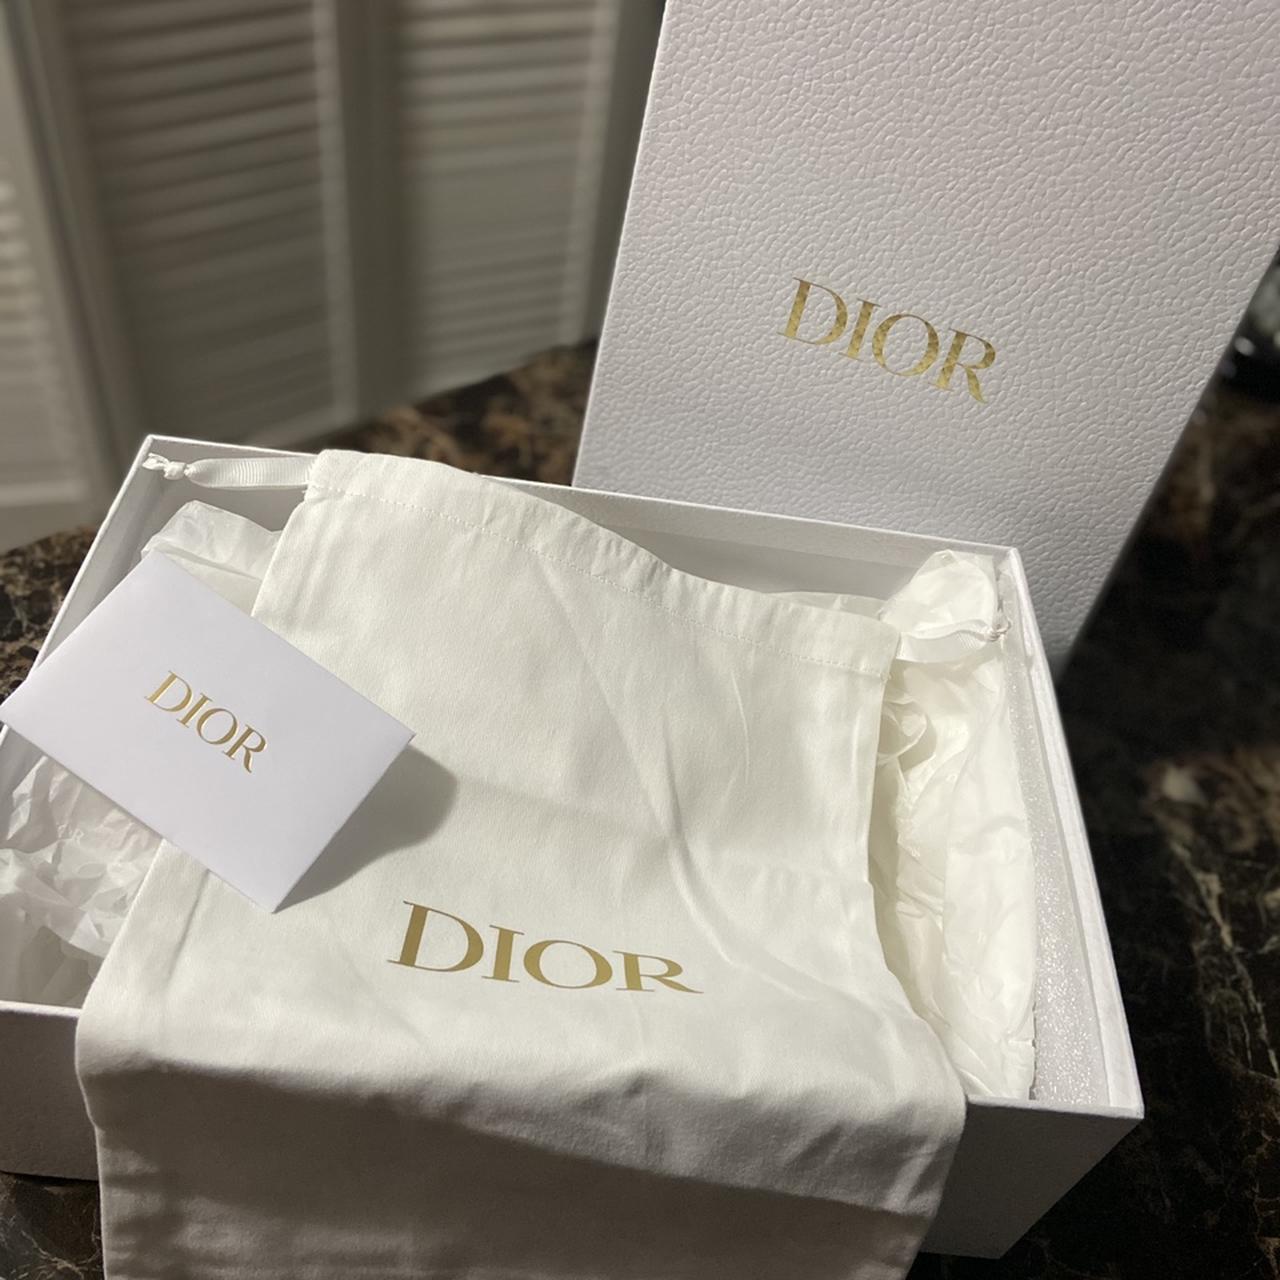 Dior Packaging  Etsy